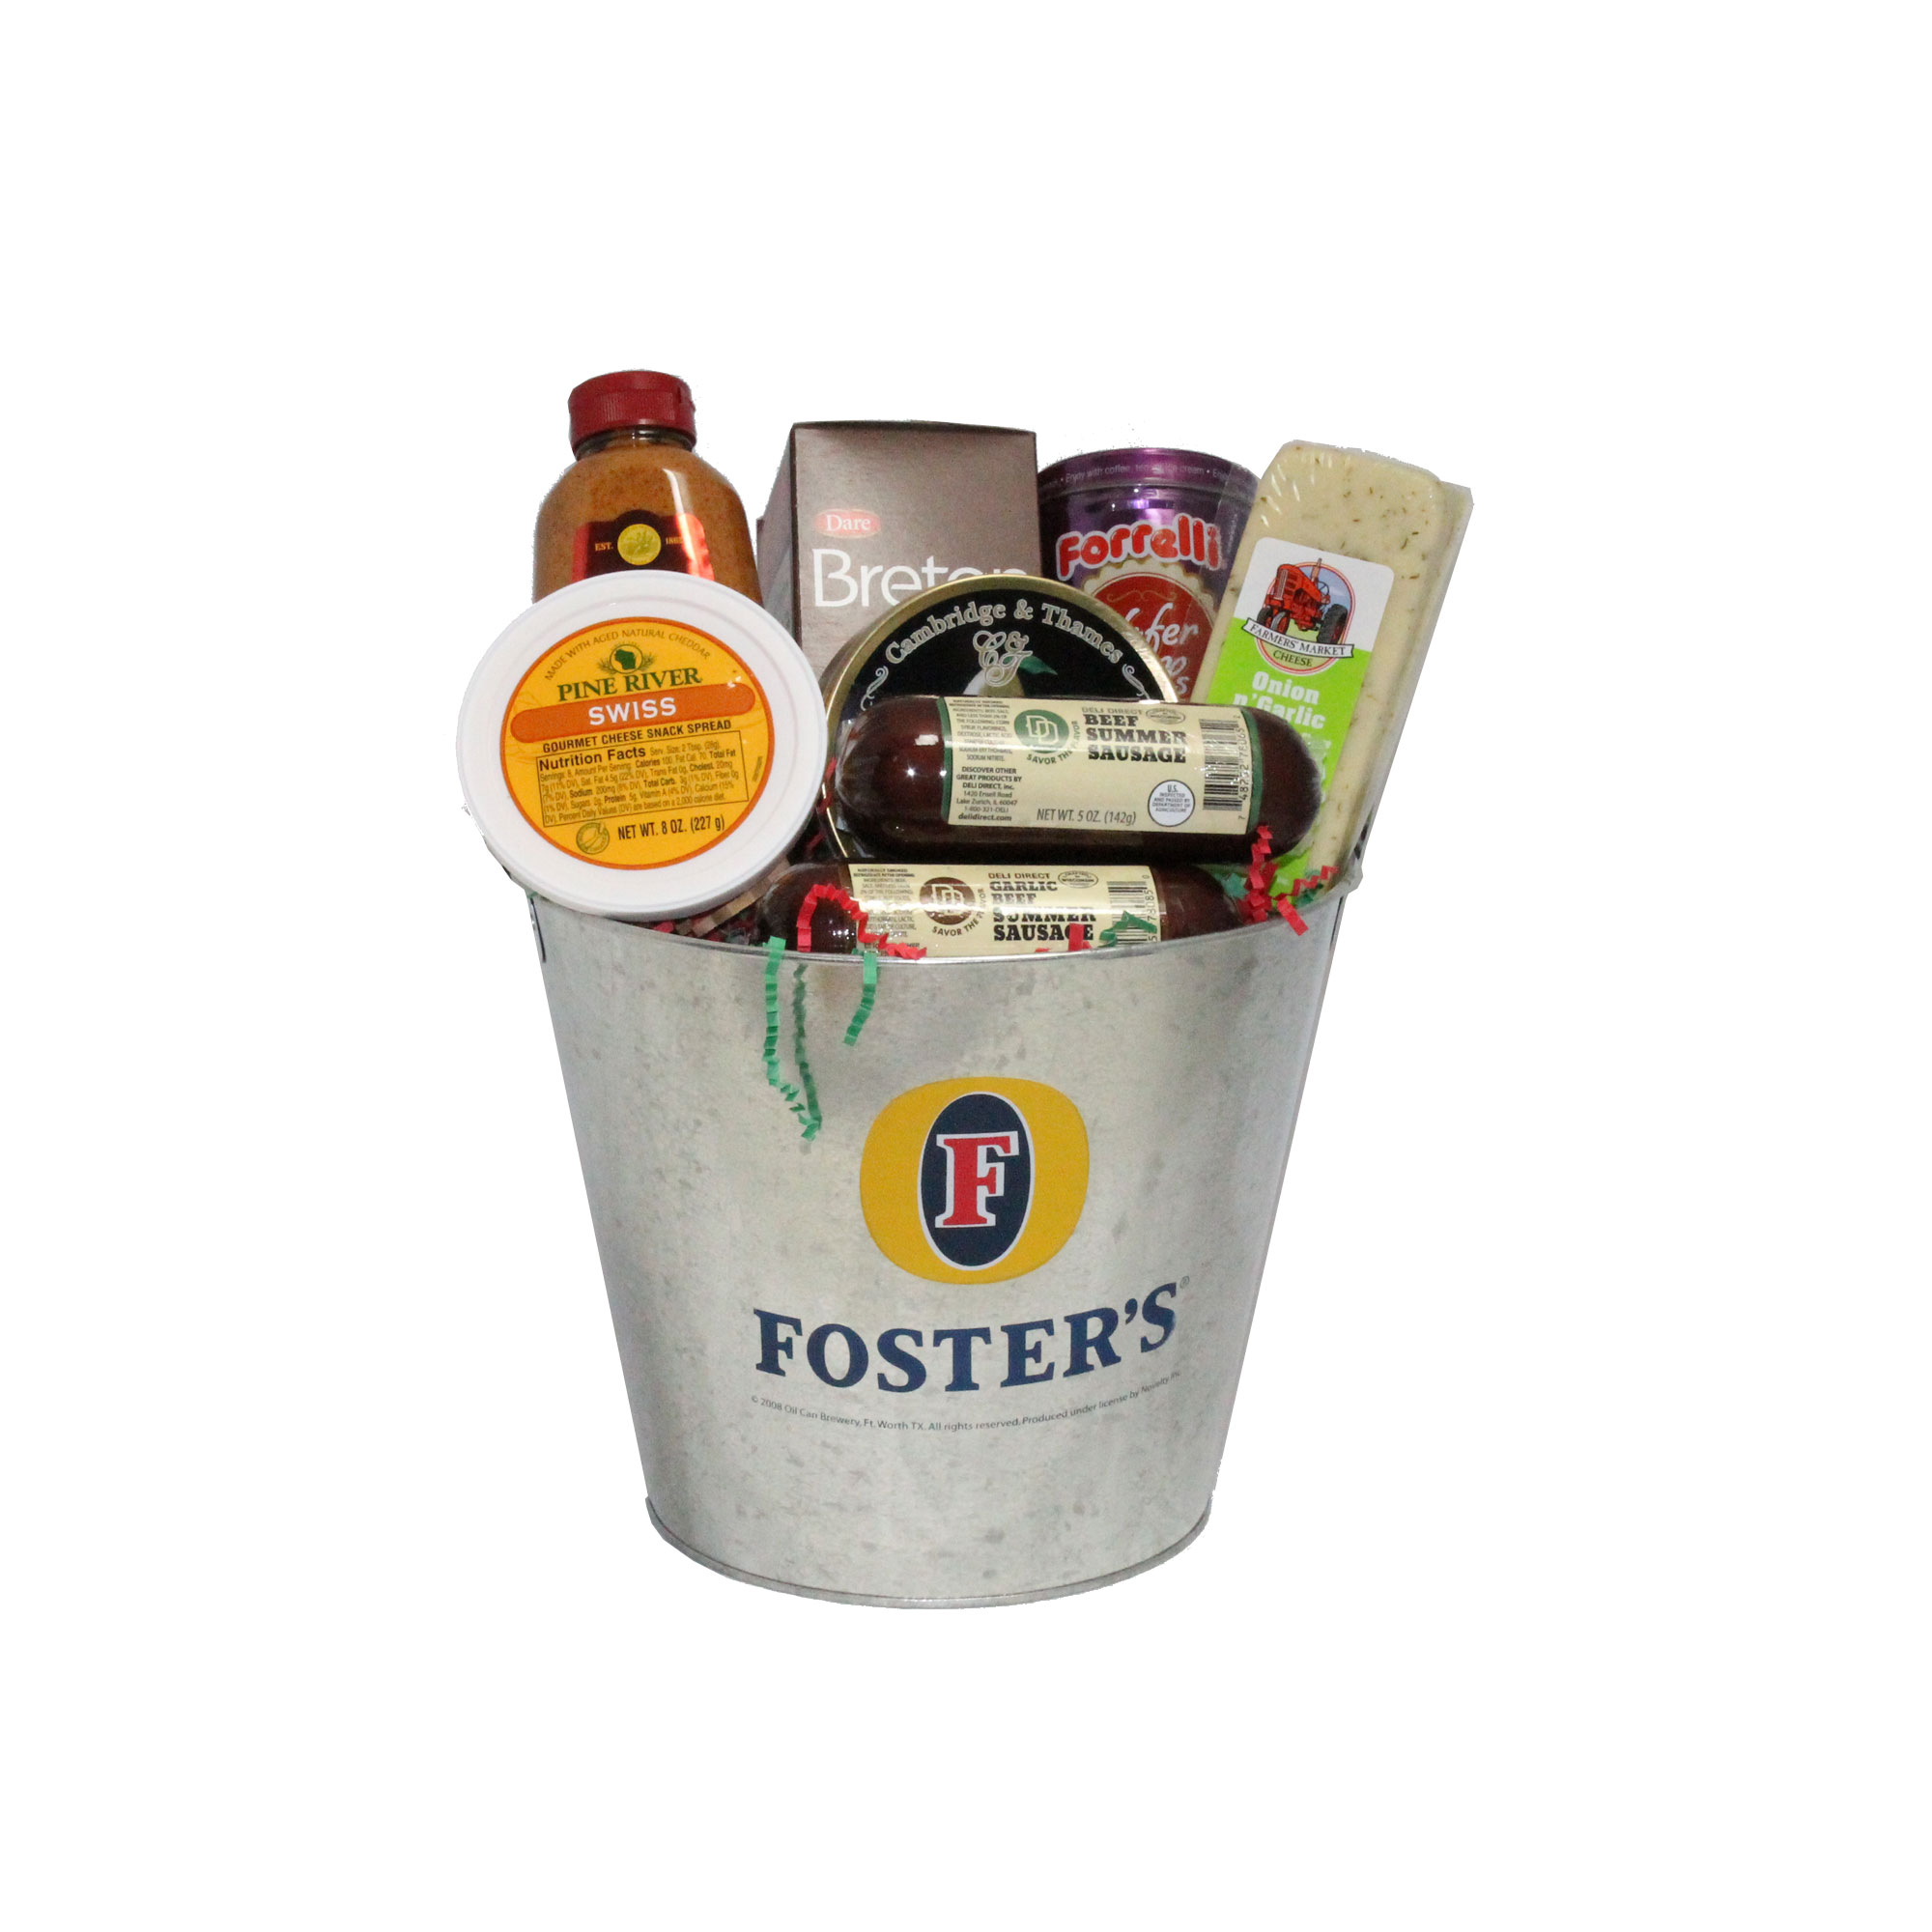 CC Home Furnishings 9pc Silver and Blue Fosters Beer Bucket with Goodies 20"